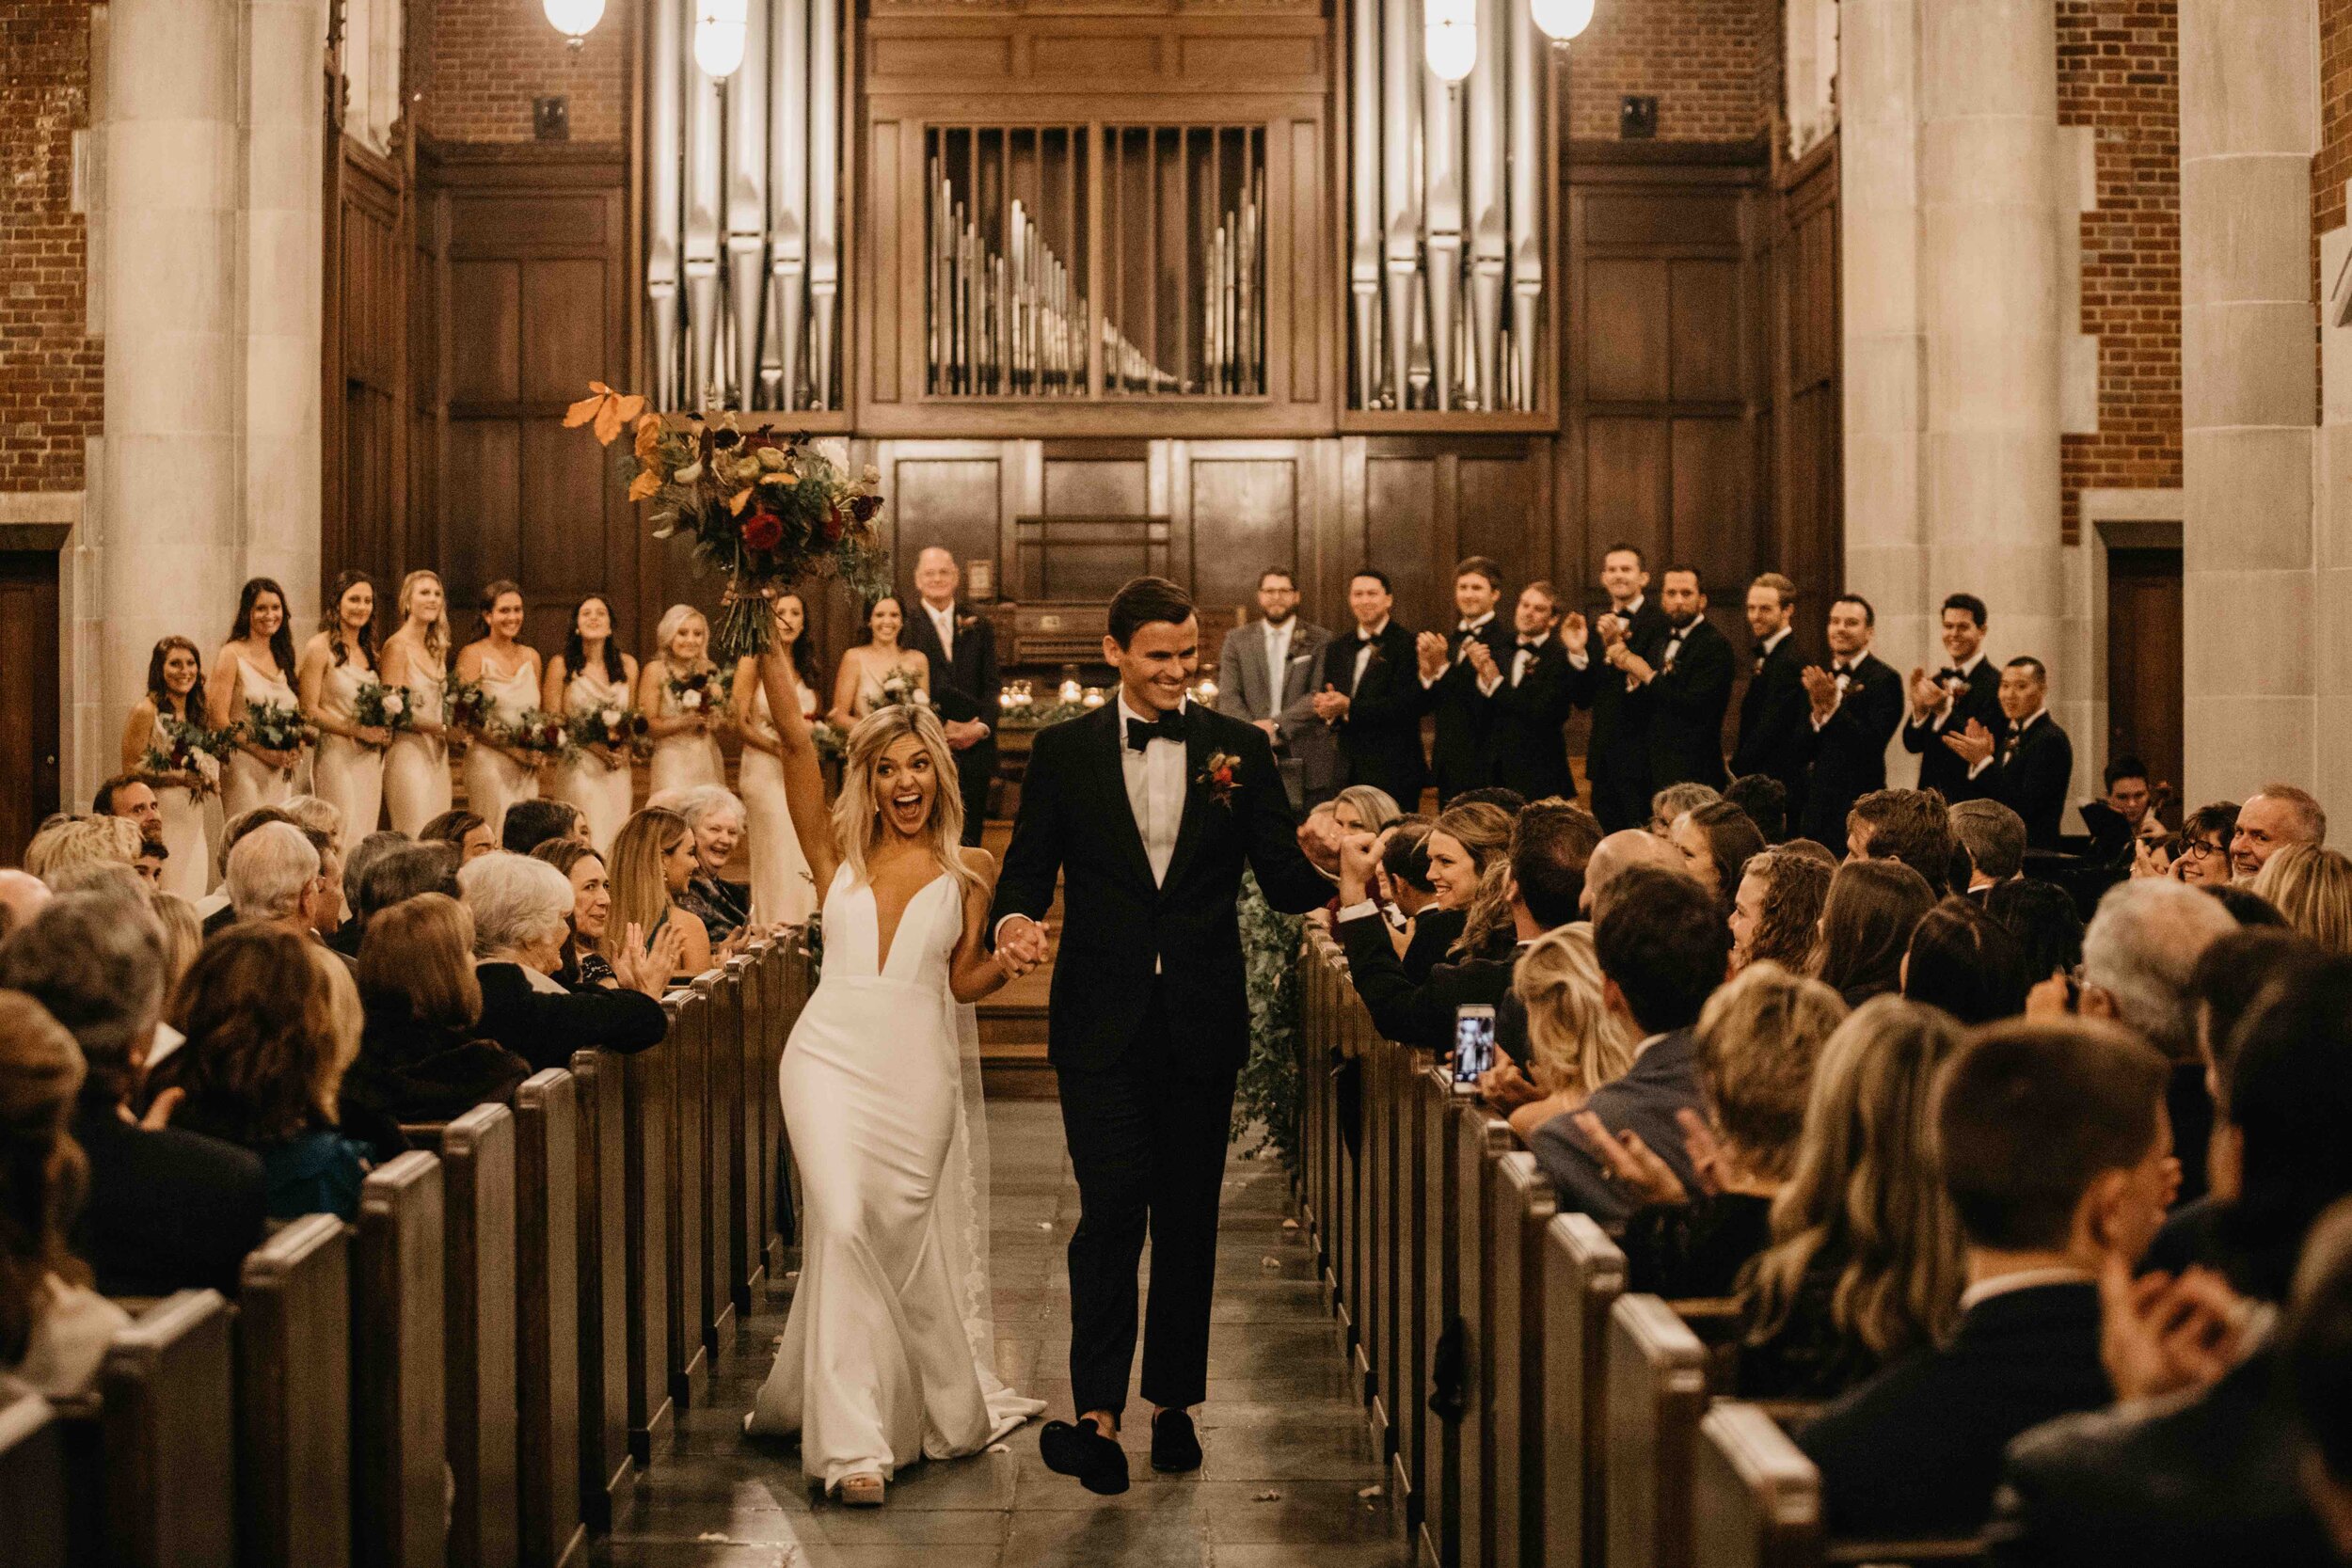 October wedding ceremony in the Wightman Chapel at Scarritt-Bennett. Natural, asymmetrical bride’s bouquet with fall flowers and lush greenery. Nashville luxury wedding florist.